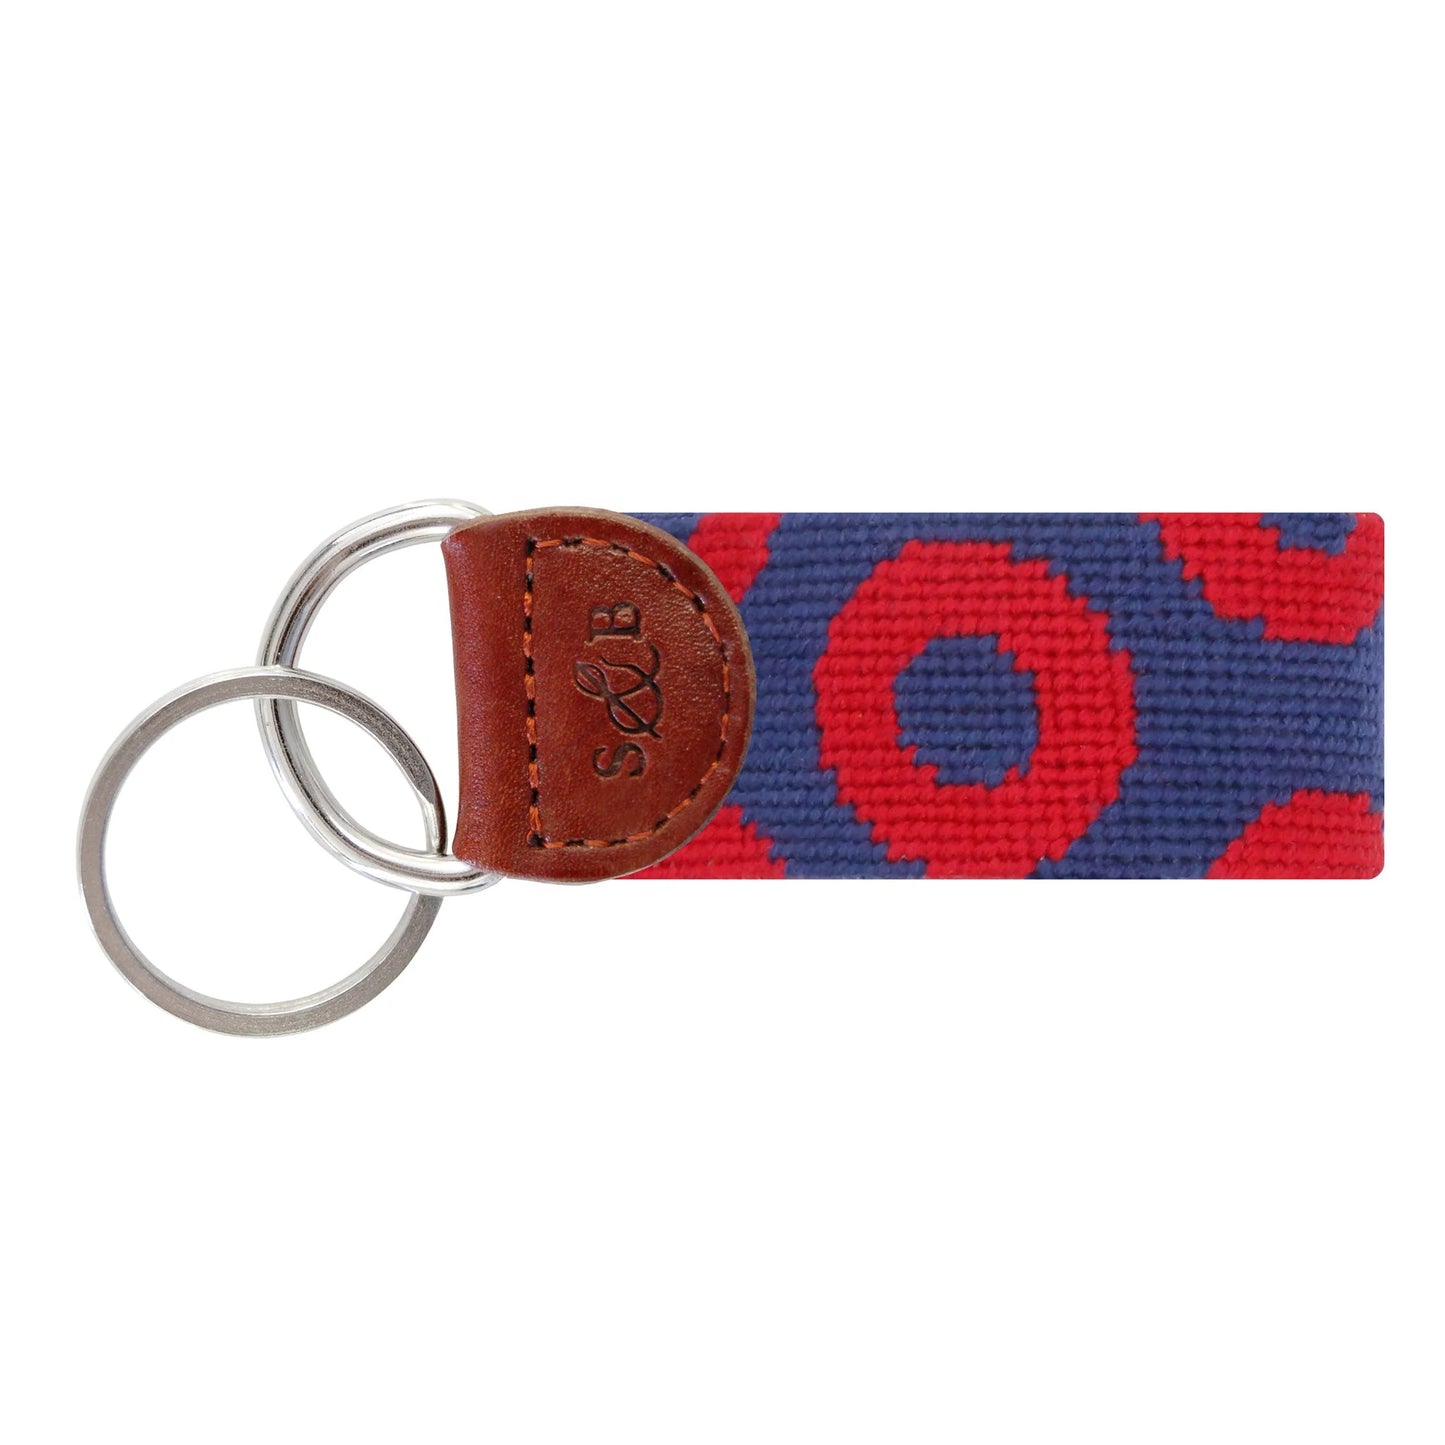 Smathers & Branson Key Fobs (Bands)